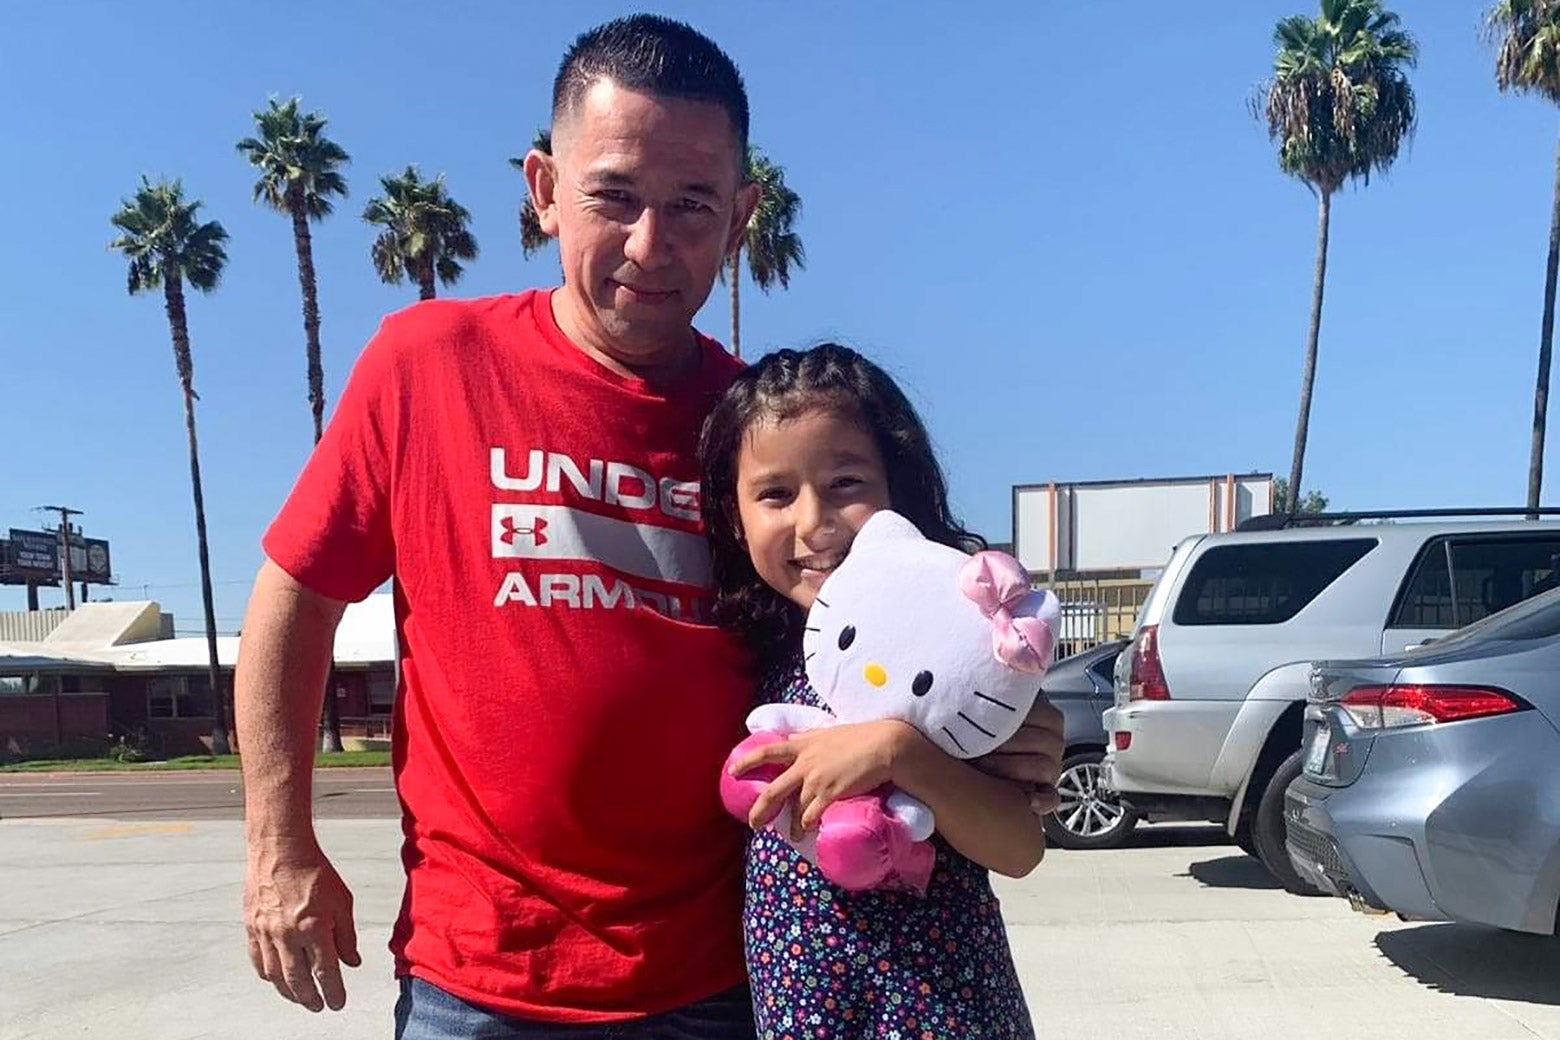 A man stands with his daughter, who is carrying a Hello Kitty toy.